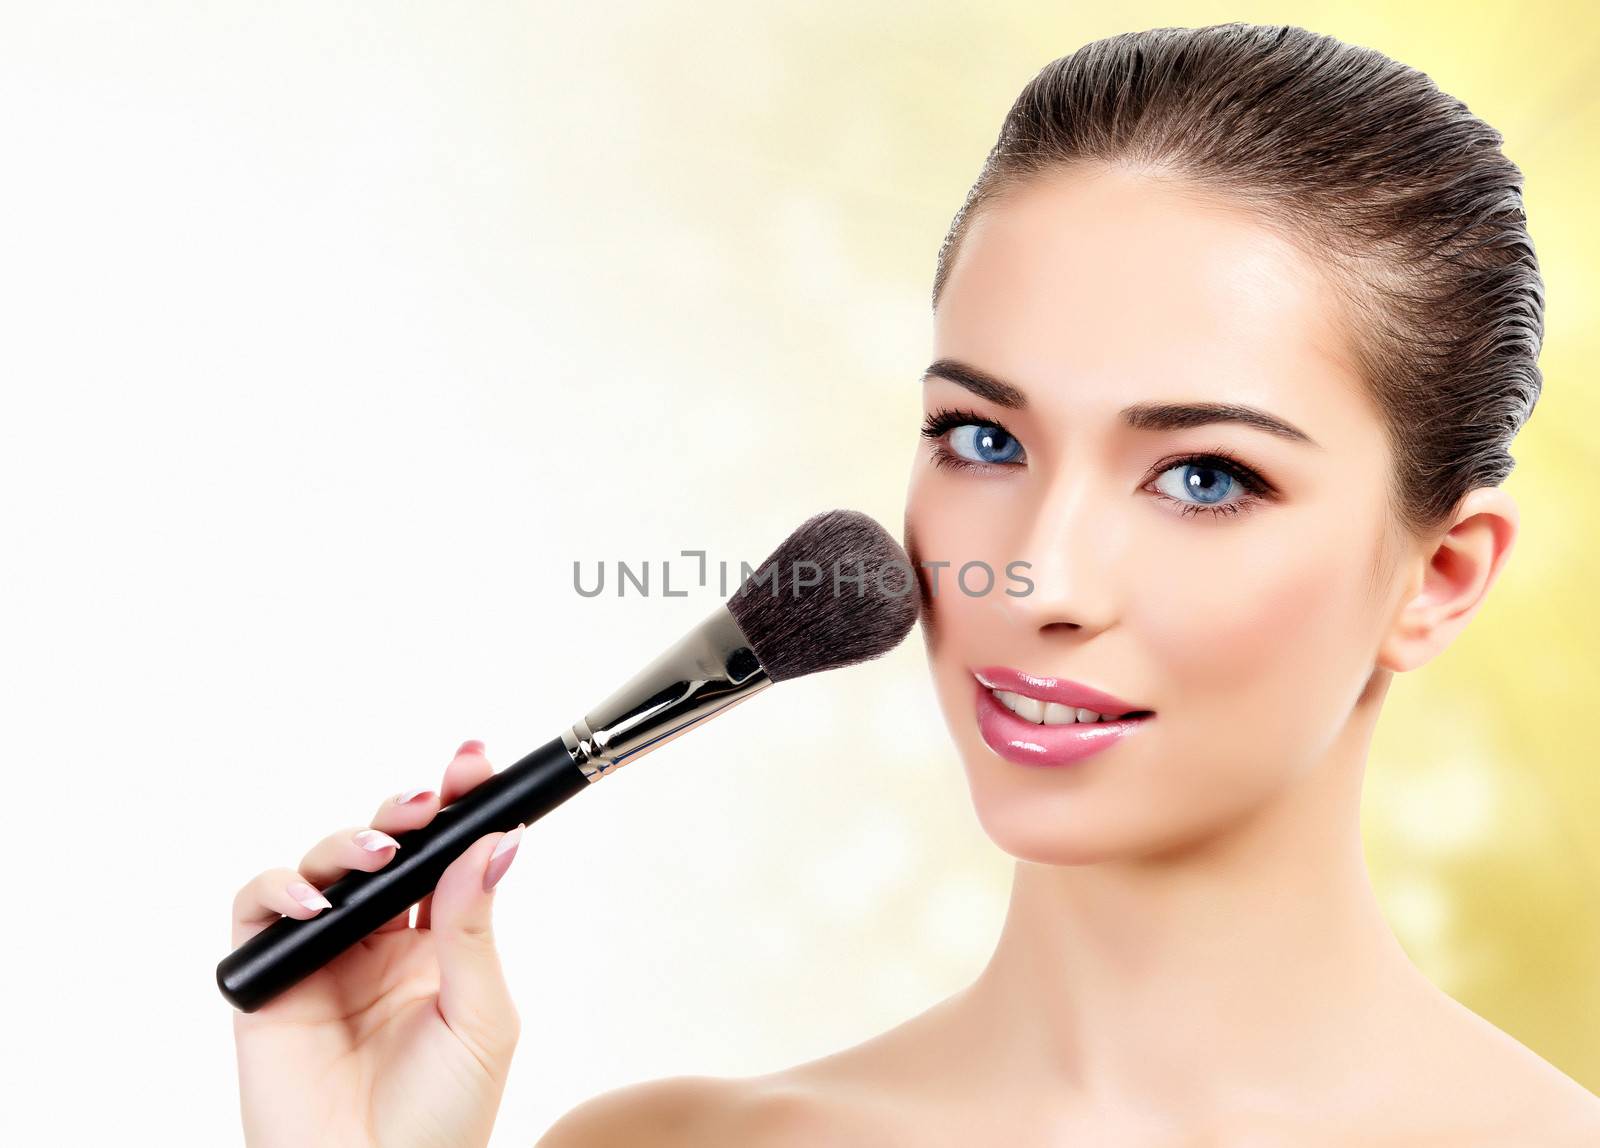 woman with cosmetic brushes against an abstract blurred backgrou by Nobilior